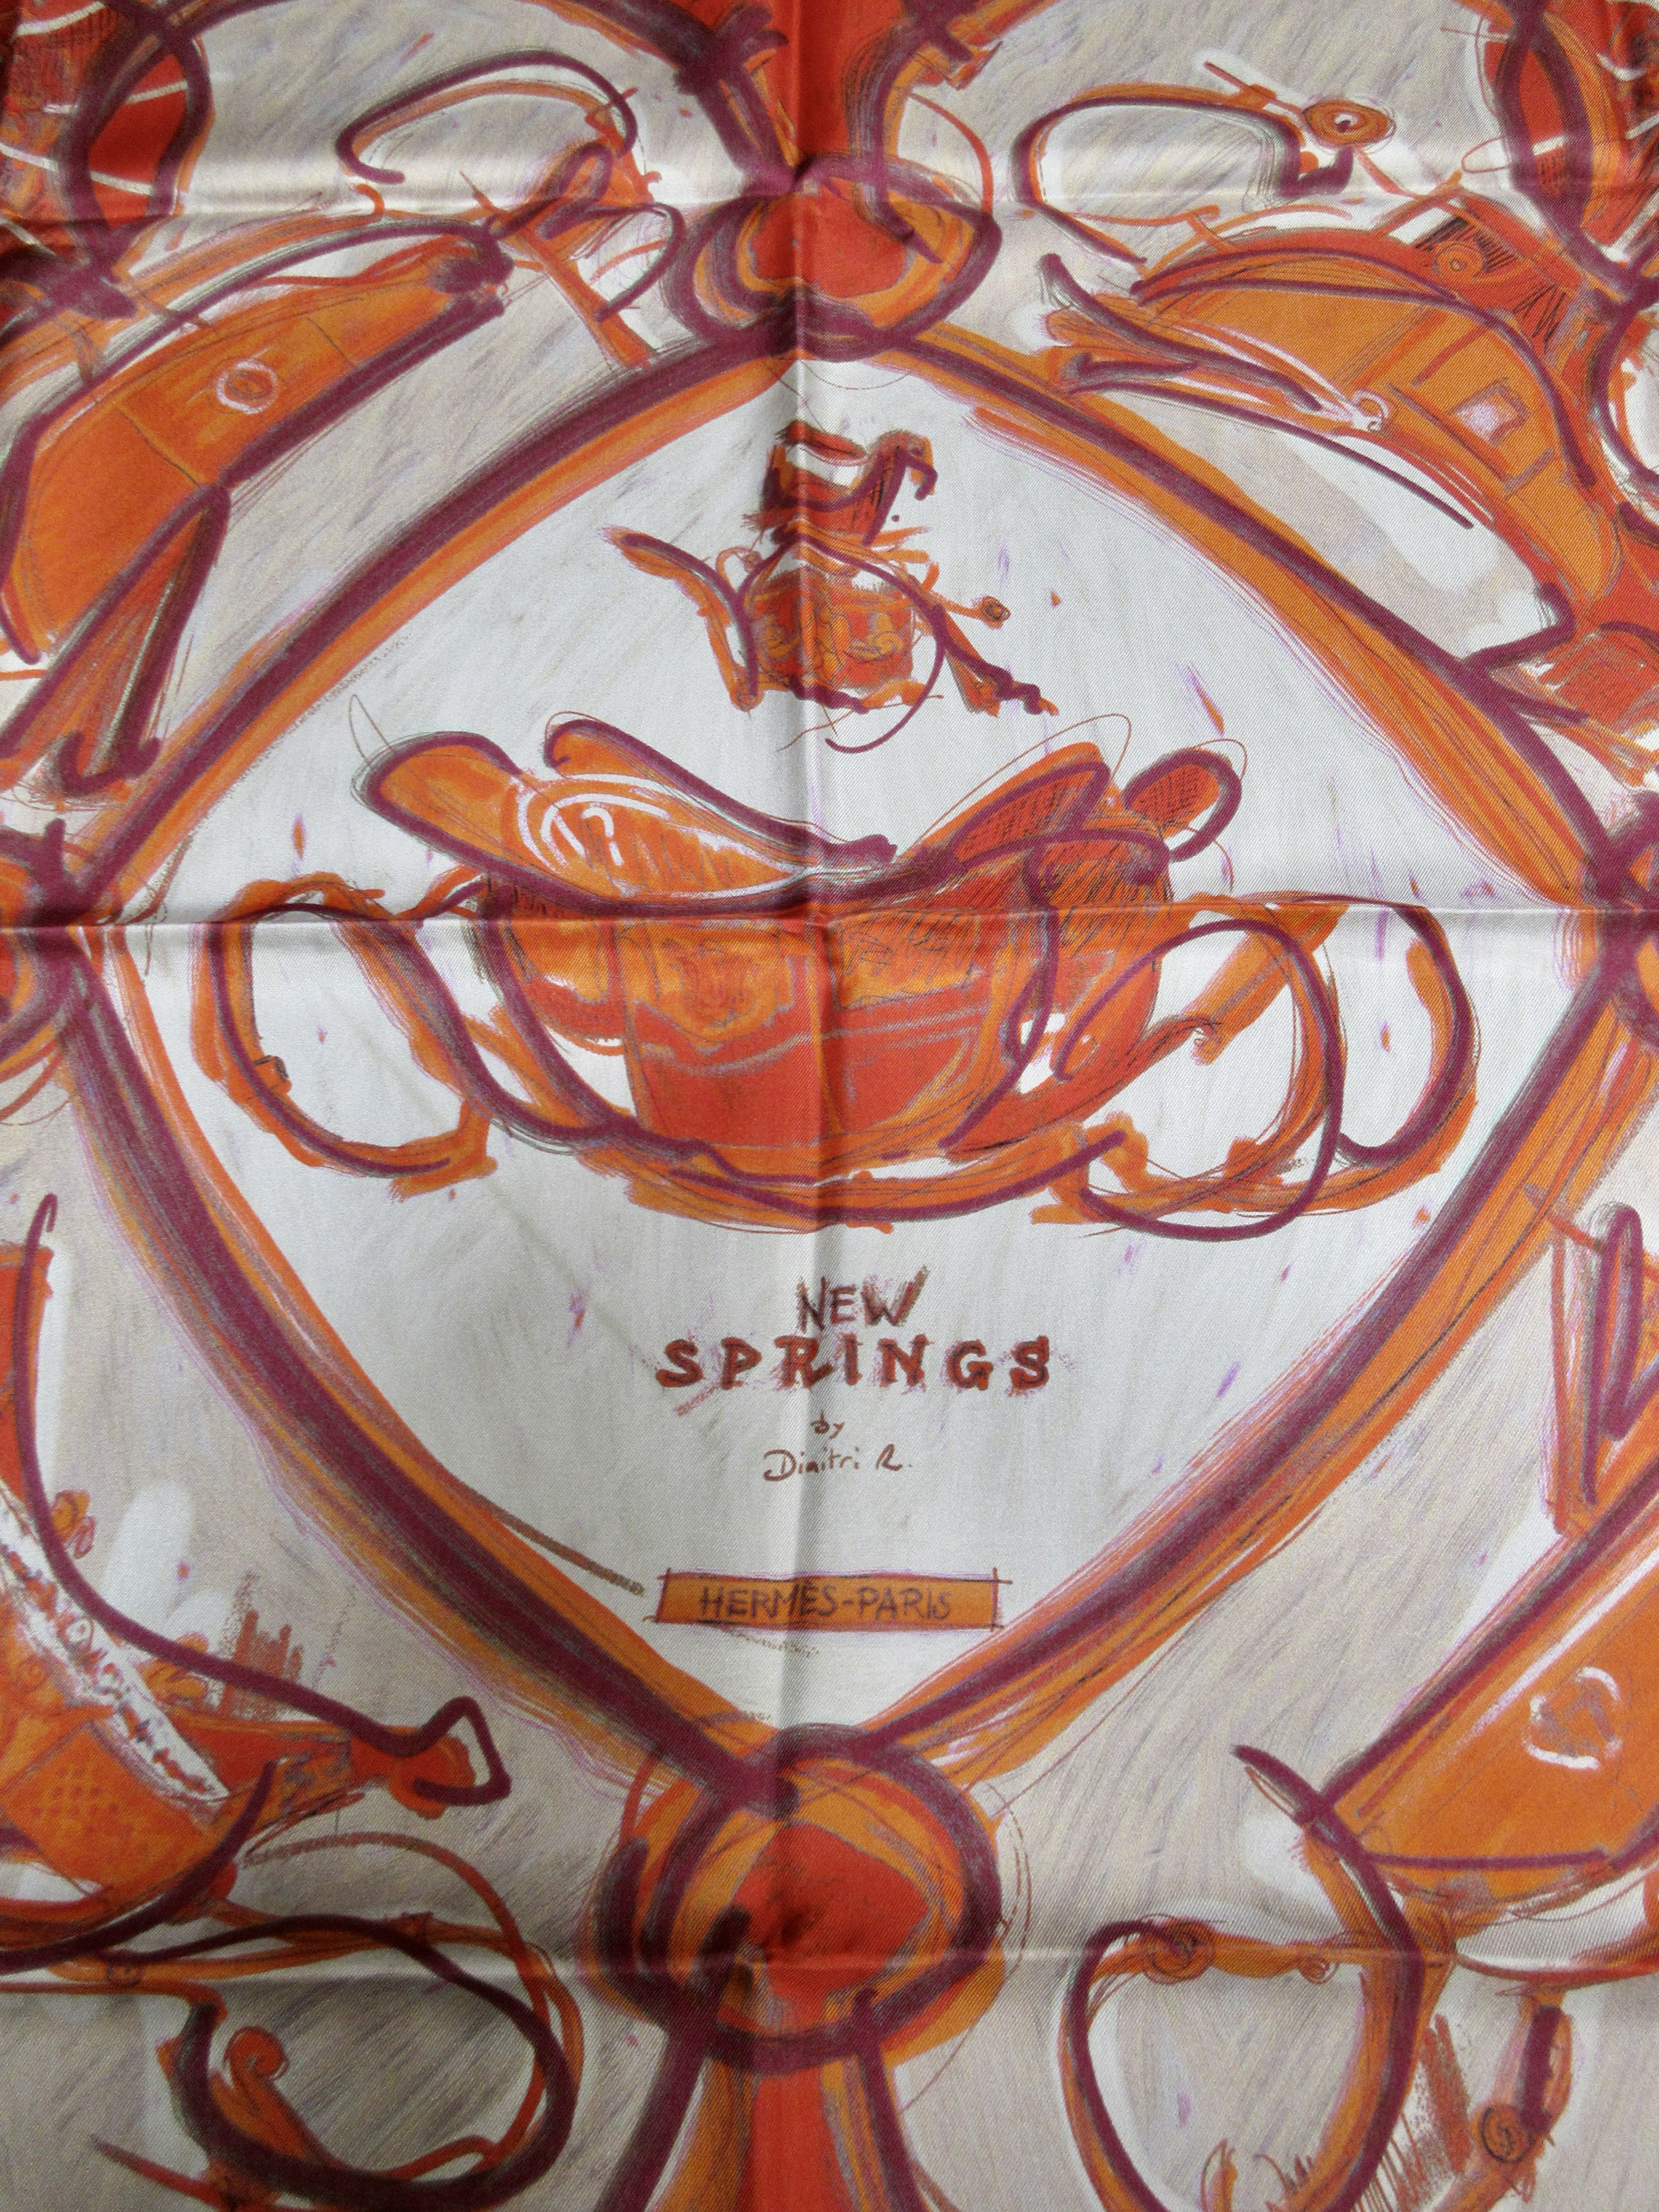 New Mags - The Story of the Hermés Scarf - Livre - Orange, White